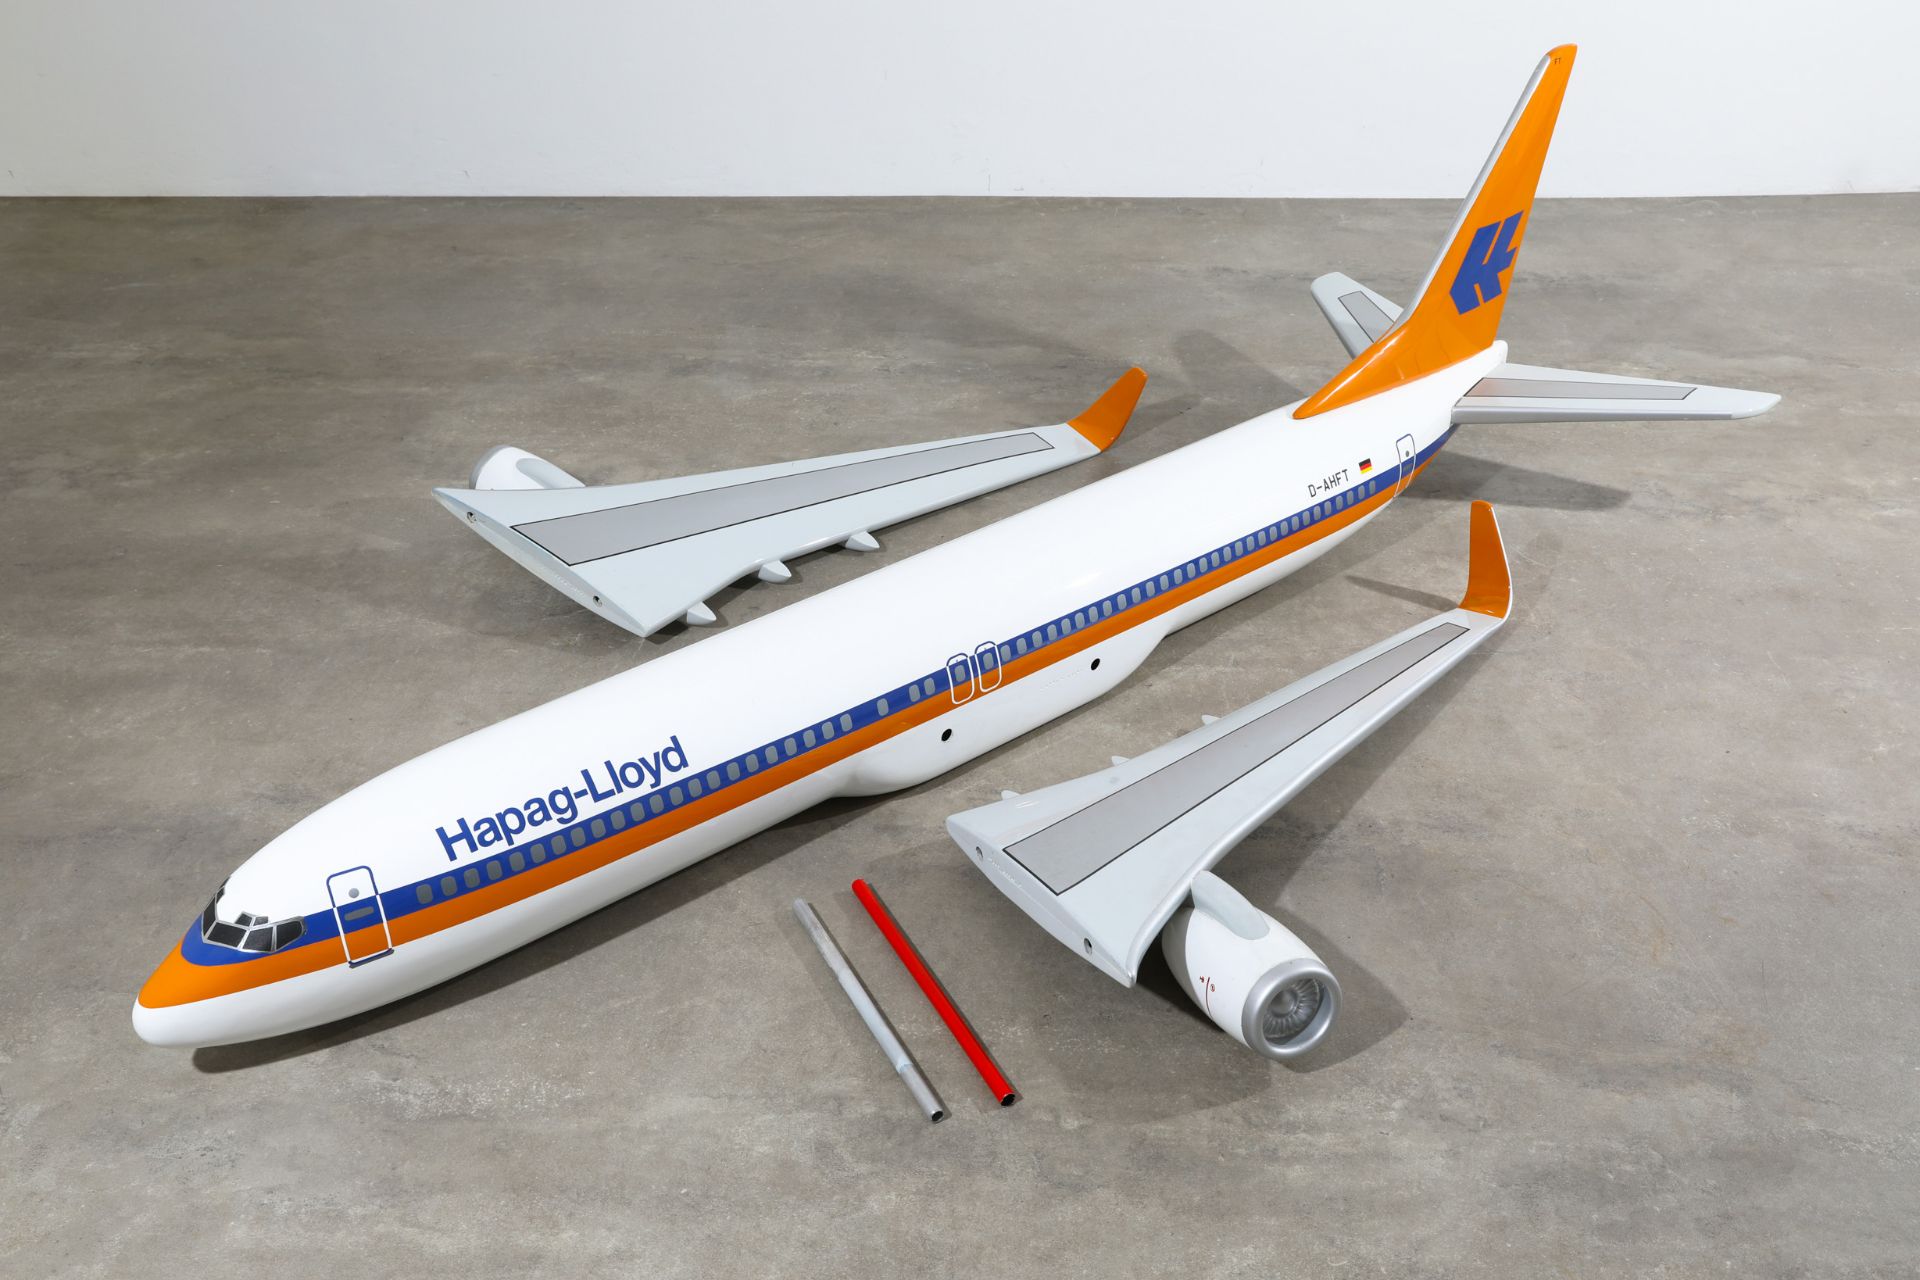 Hapag Lloyd, Boeing 737, large aircraft model, scale 1:12 - Image 5 of 5